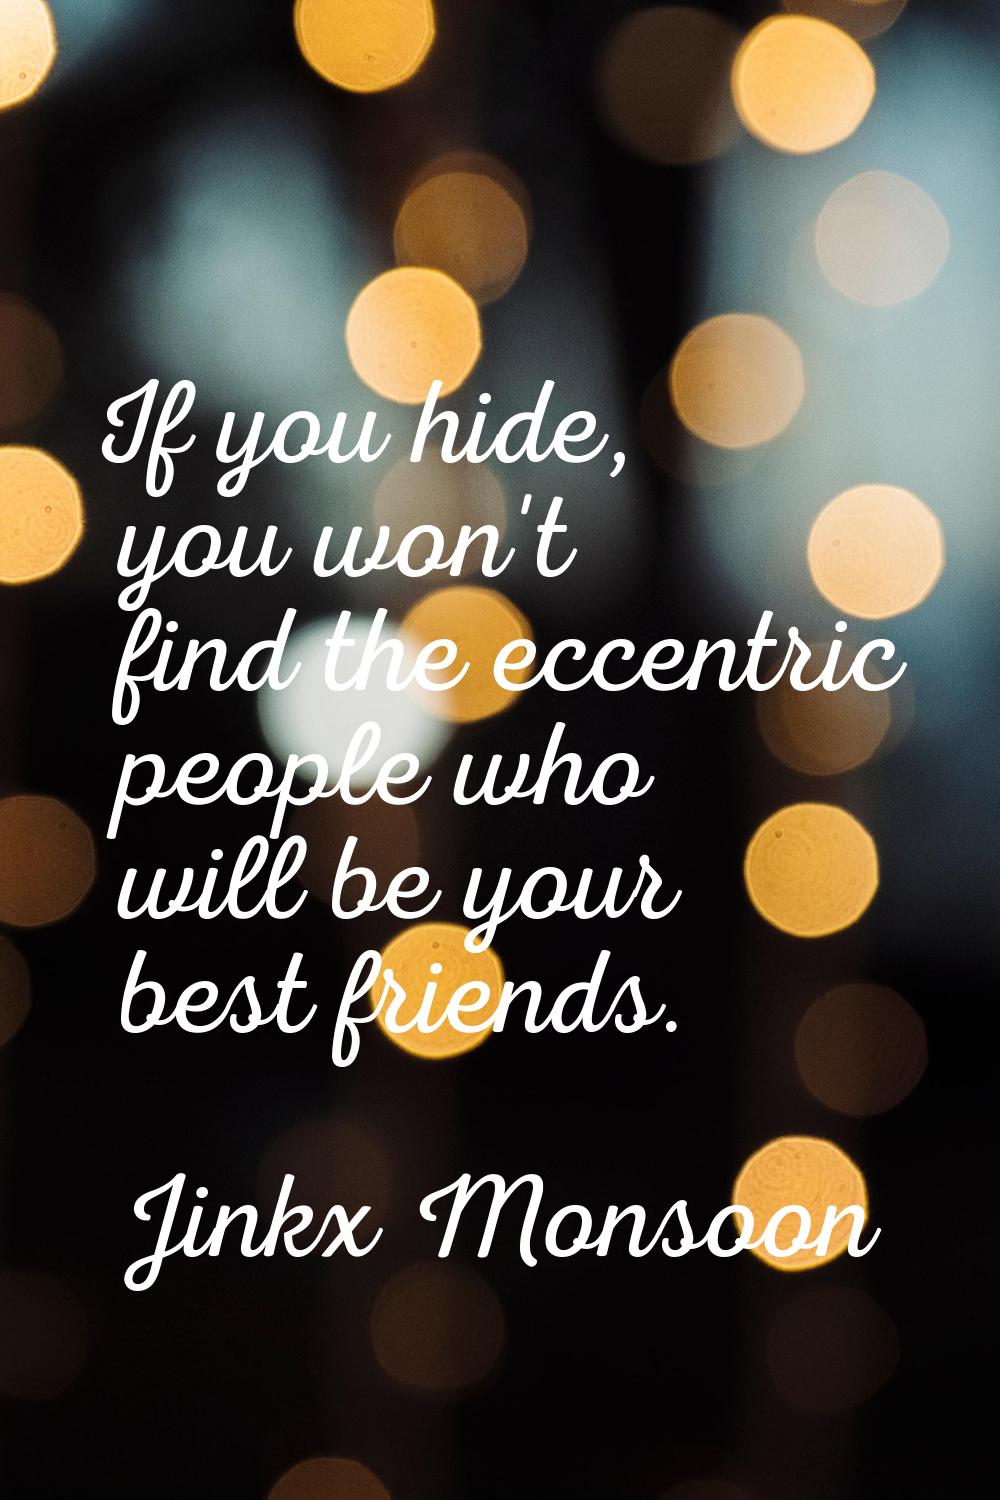 If you hide, you won't find the eccentric people who will be your best friends.